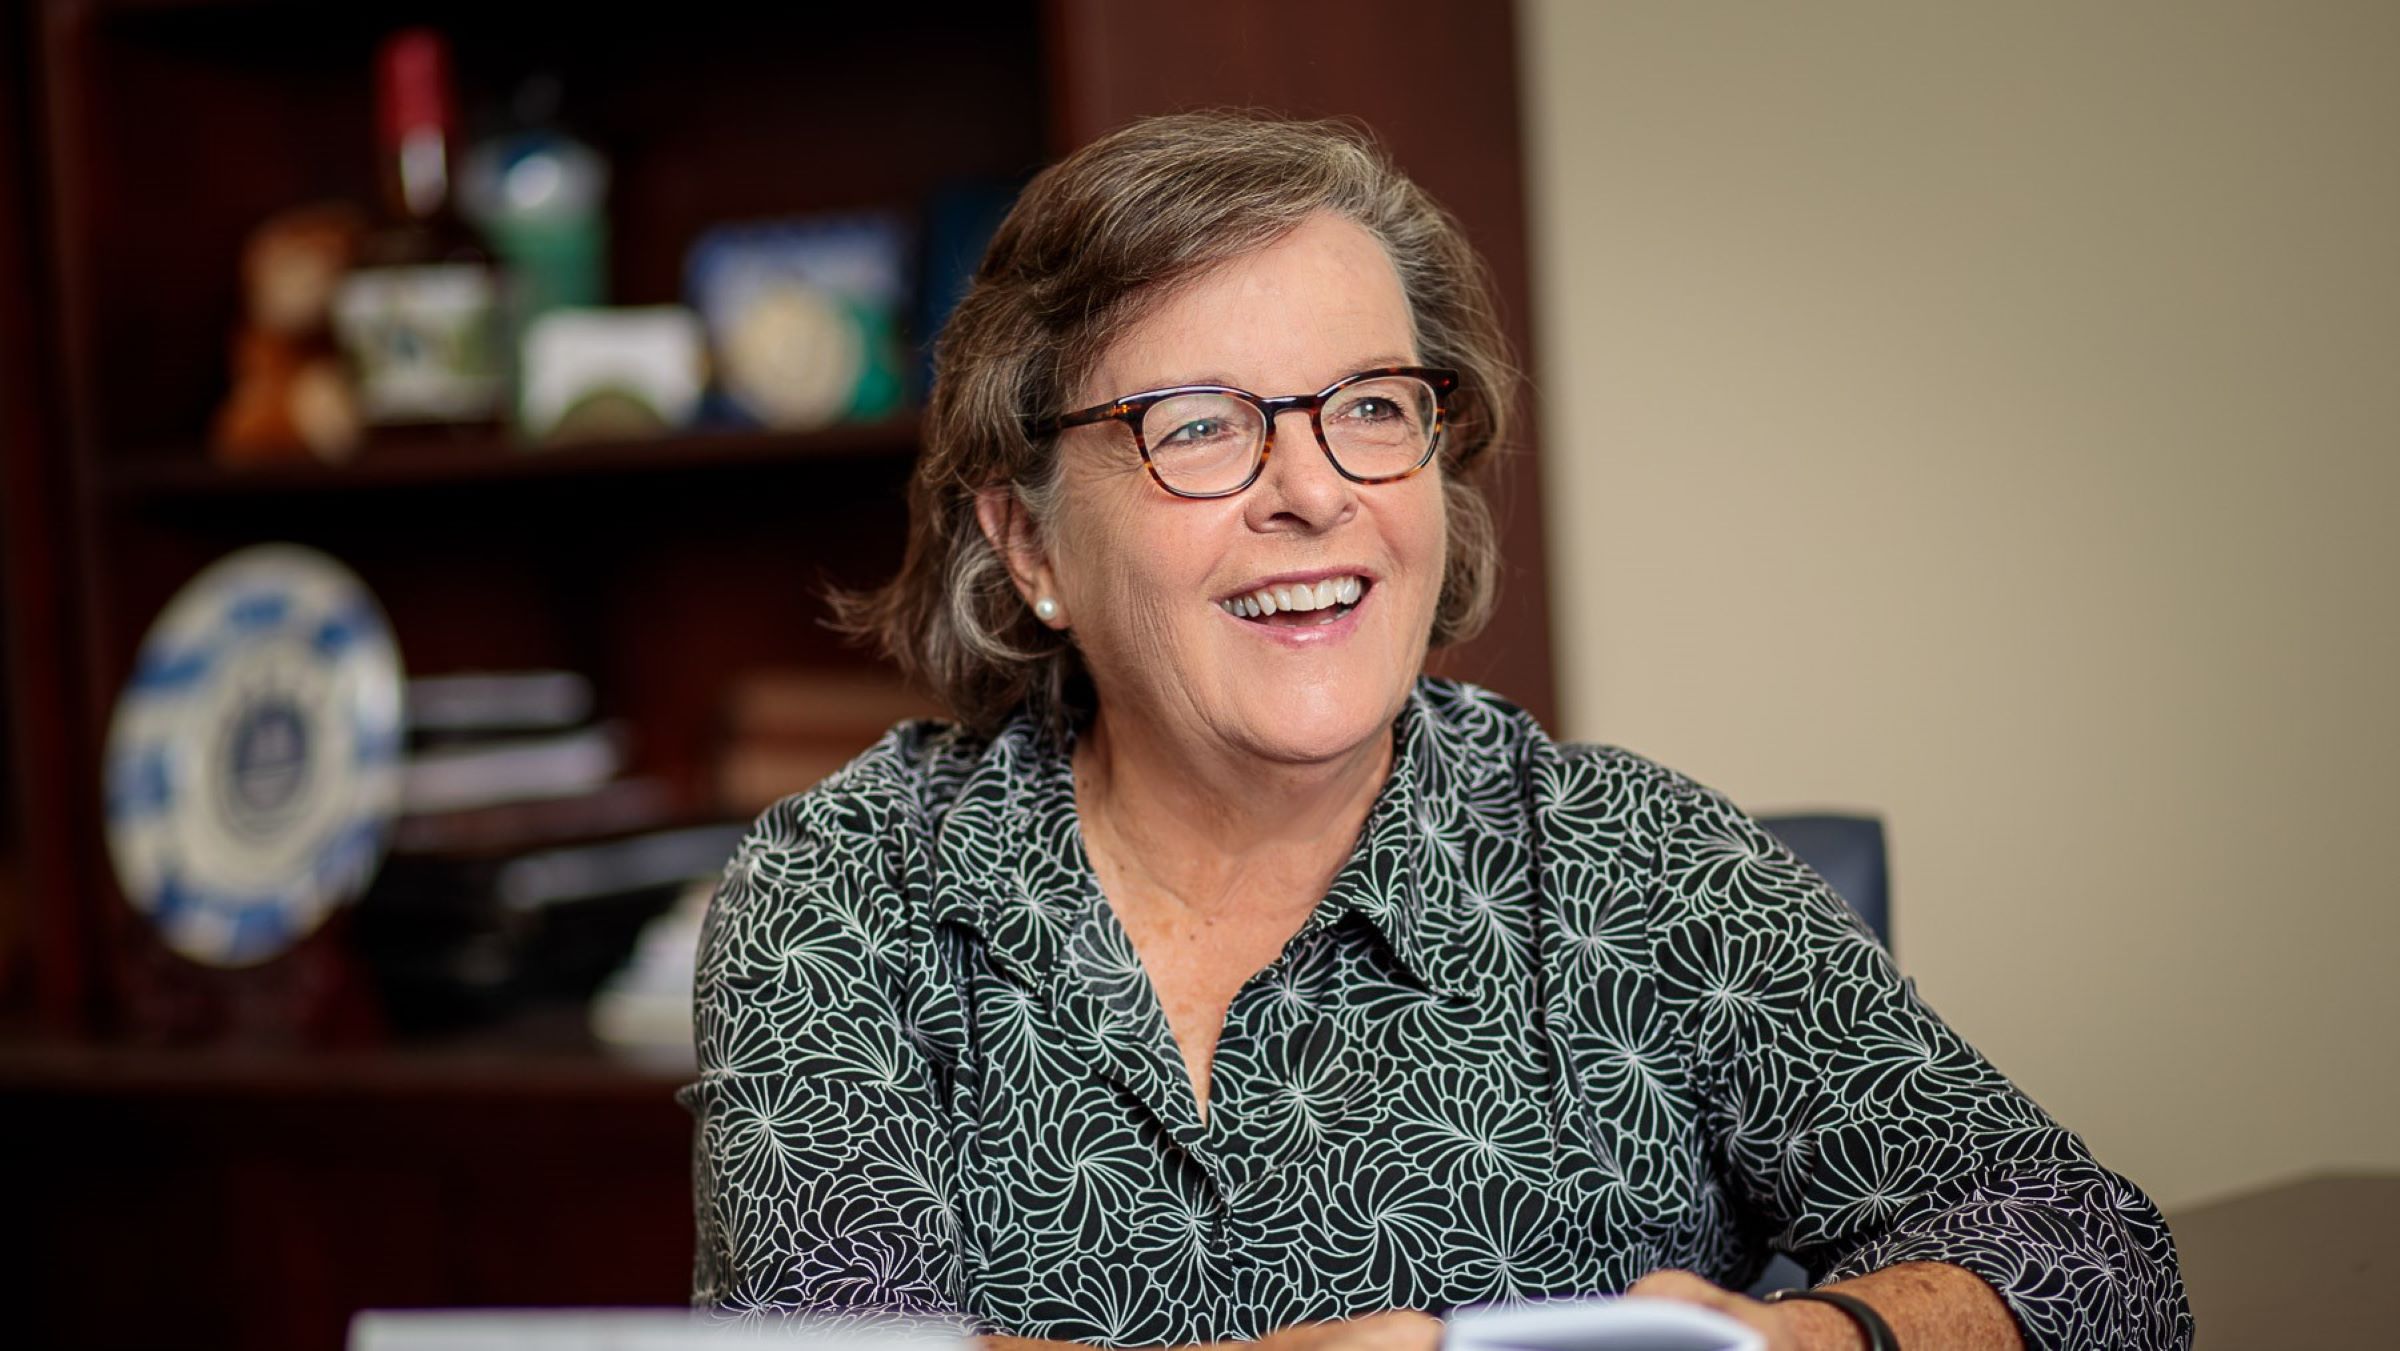 Nancy Cox was announced dean of the University of Kentucky College of Agriculture in 2014, becoming the first female to assume this leadership role at the college. Photo by Matt Barton.